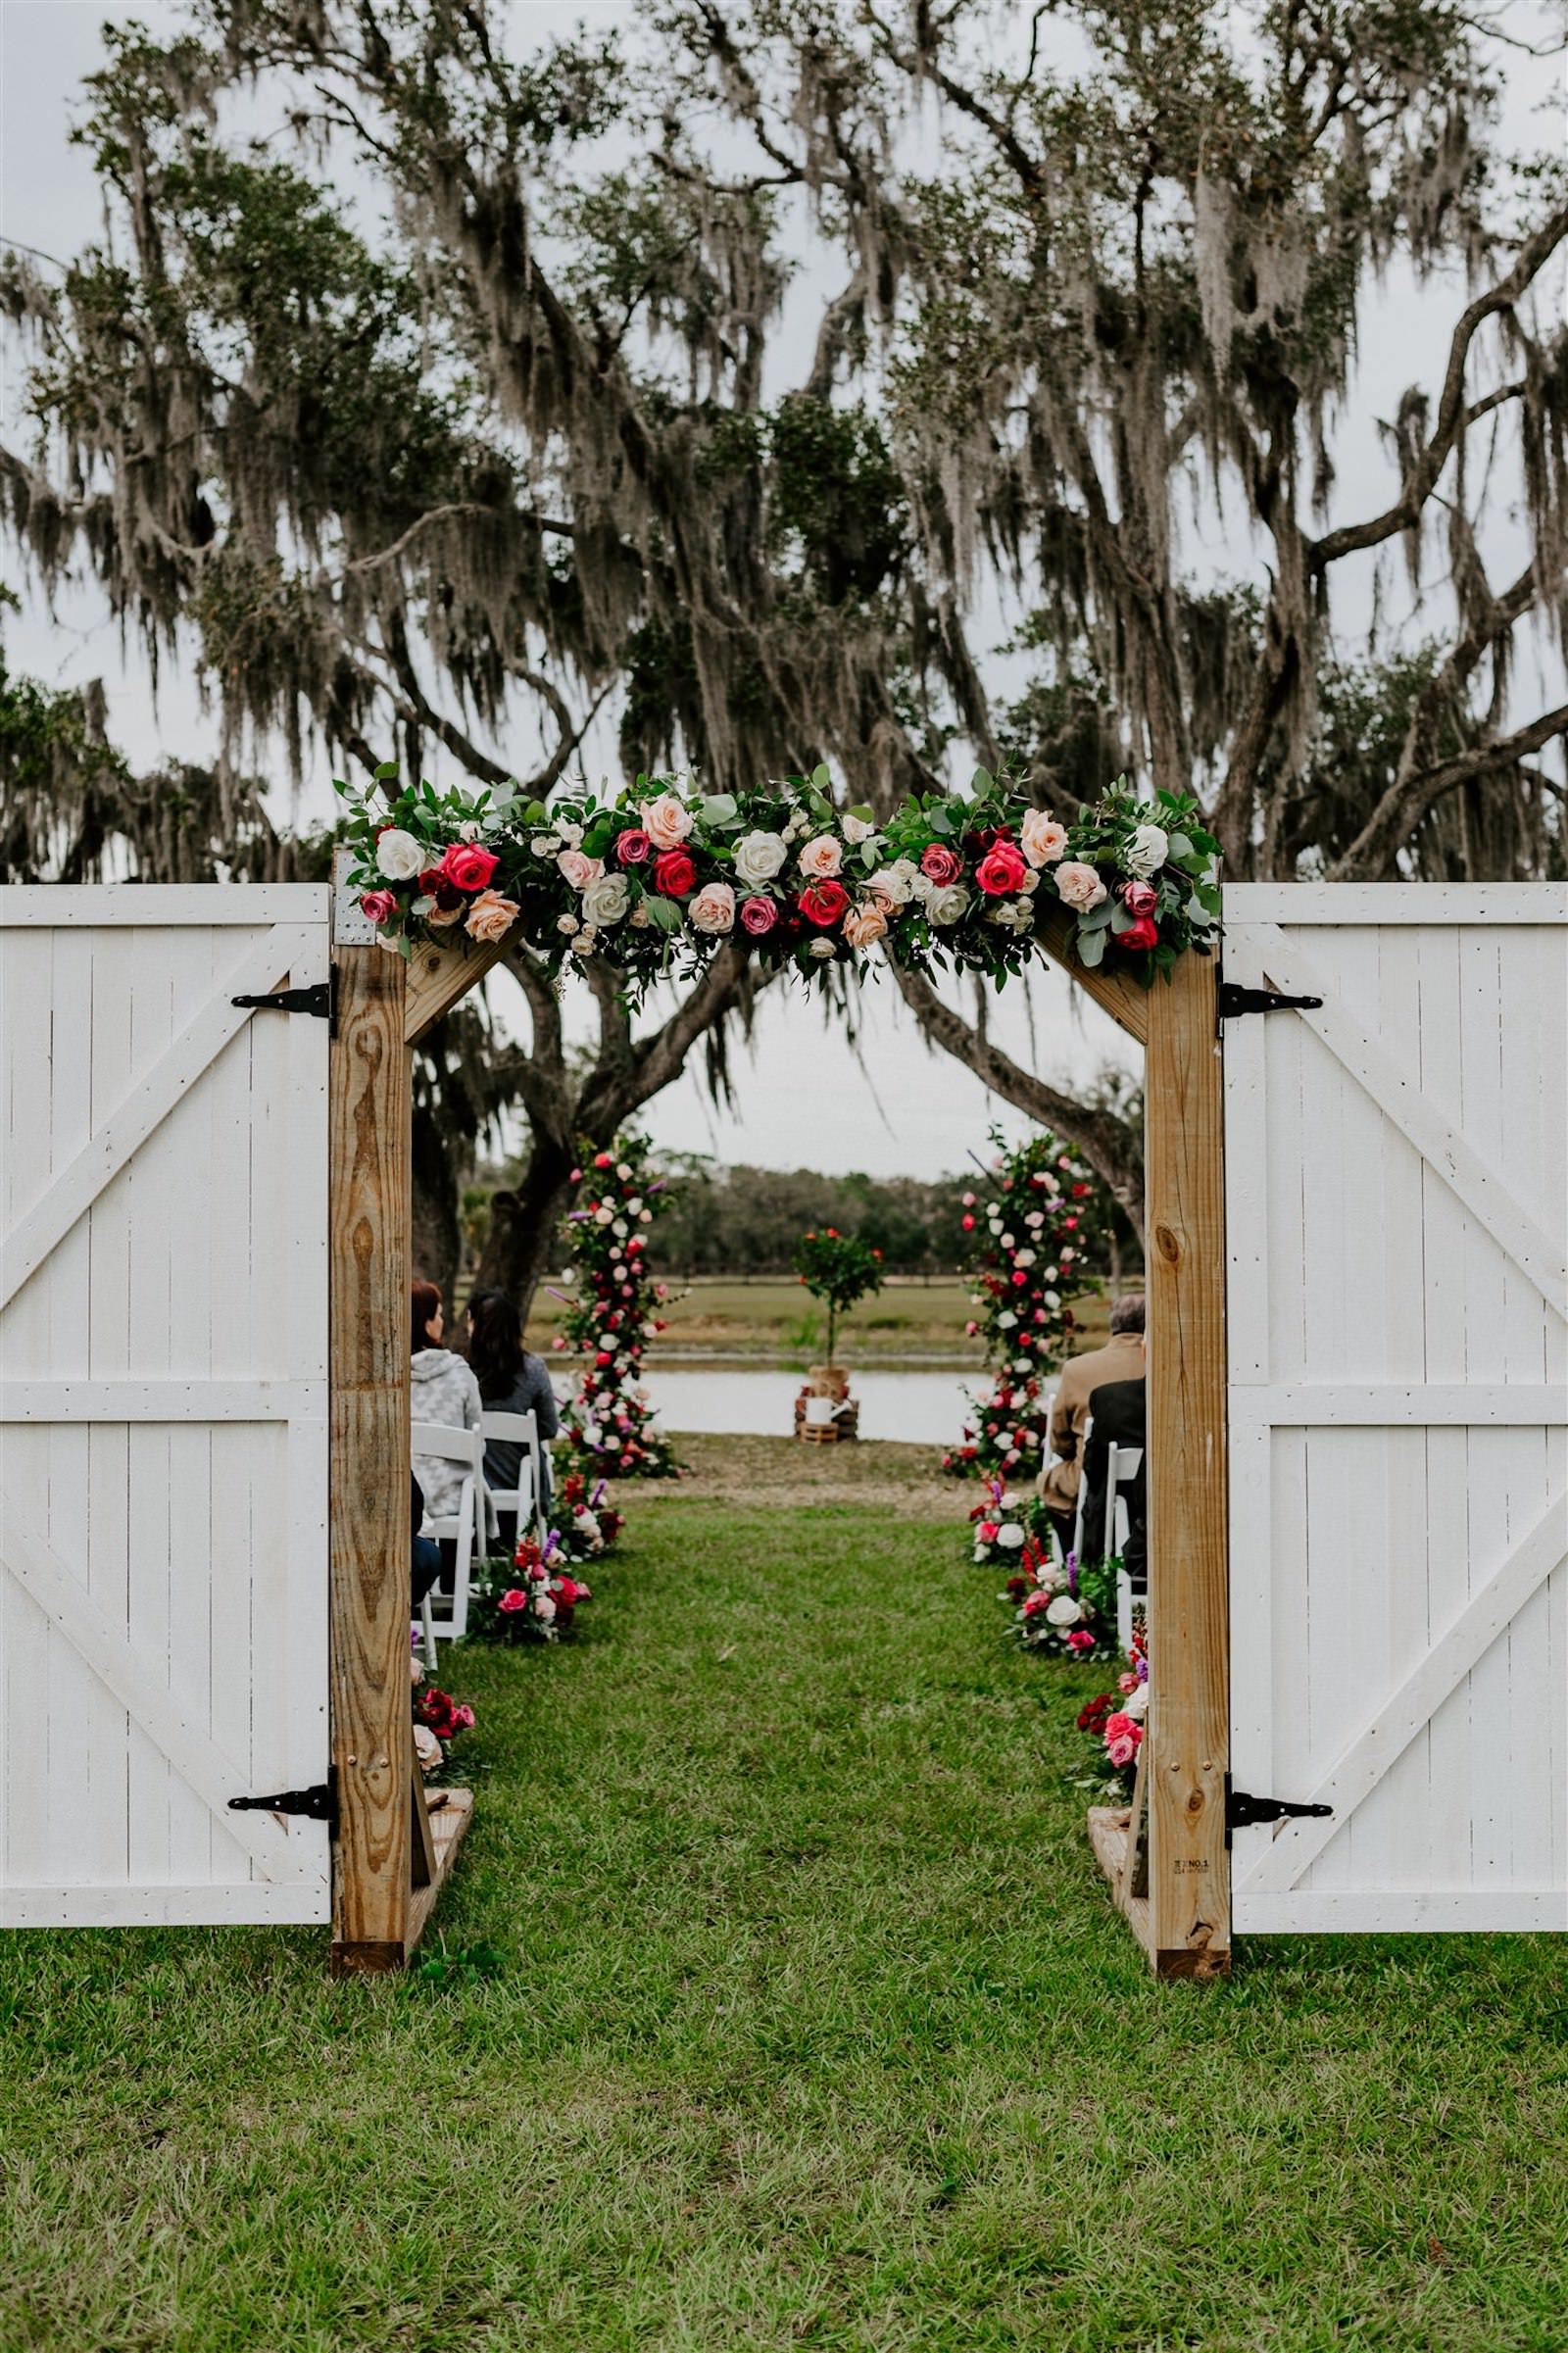 Rustic Tampa Outdoor Oak Tree Wedding Ceremony with White Garden Chairs | Wedding Barn Doors Entrance with Floral Garland | Tampa Wedding Florist Monarch Events and Designs | Deep Red Maroon Burgundy Roses and Blush Pink and White Roses with Eucalyptus Greenery